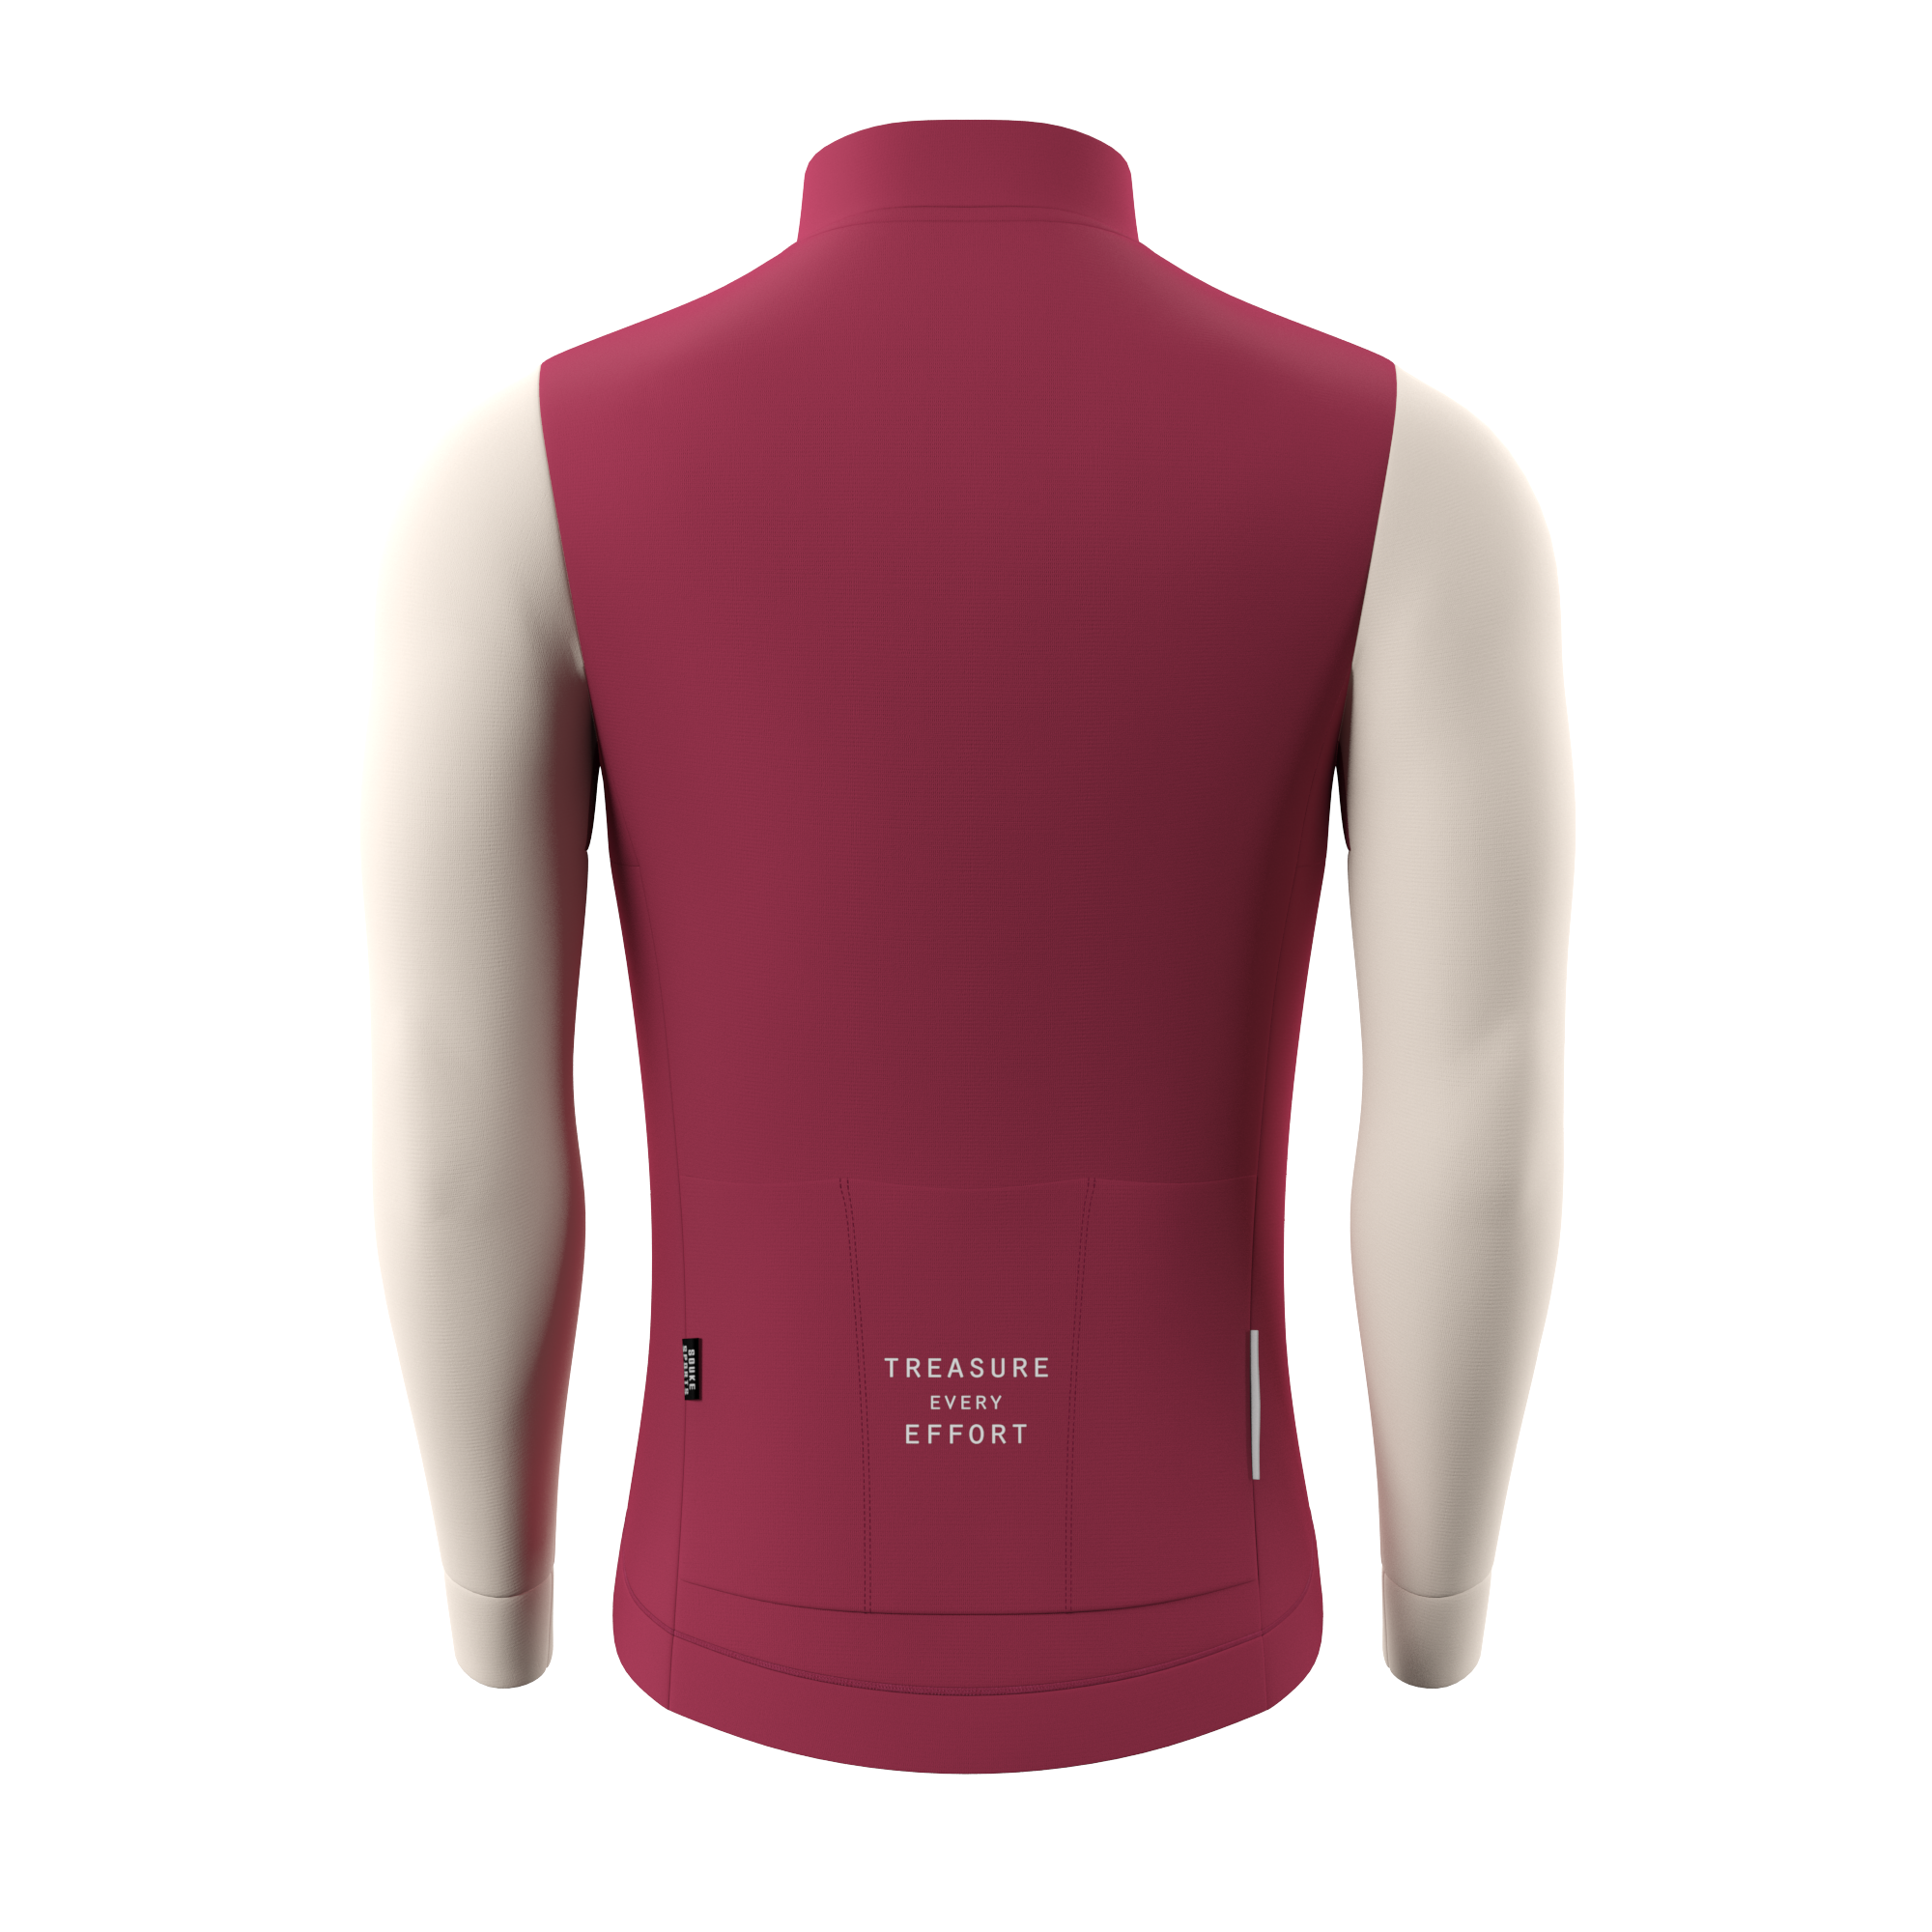 cycling long-sleeve jersey, Graphene jersey, jersey for winter, blue long jersey, jersey for winter and autumn, cold weather jersey.